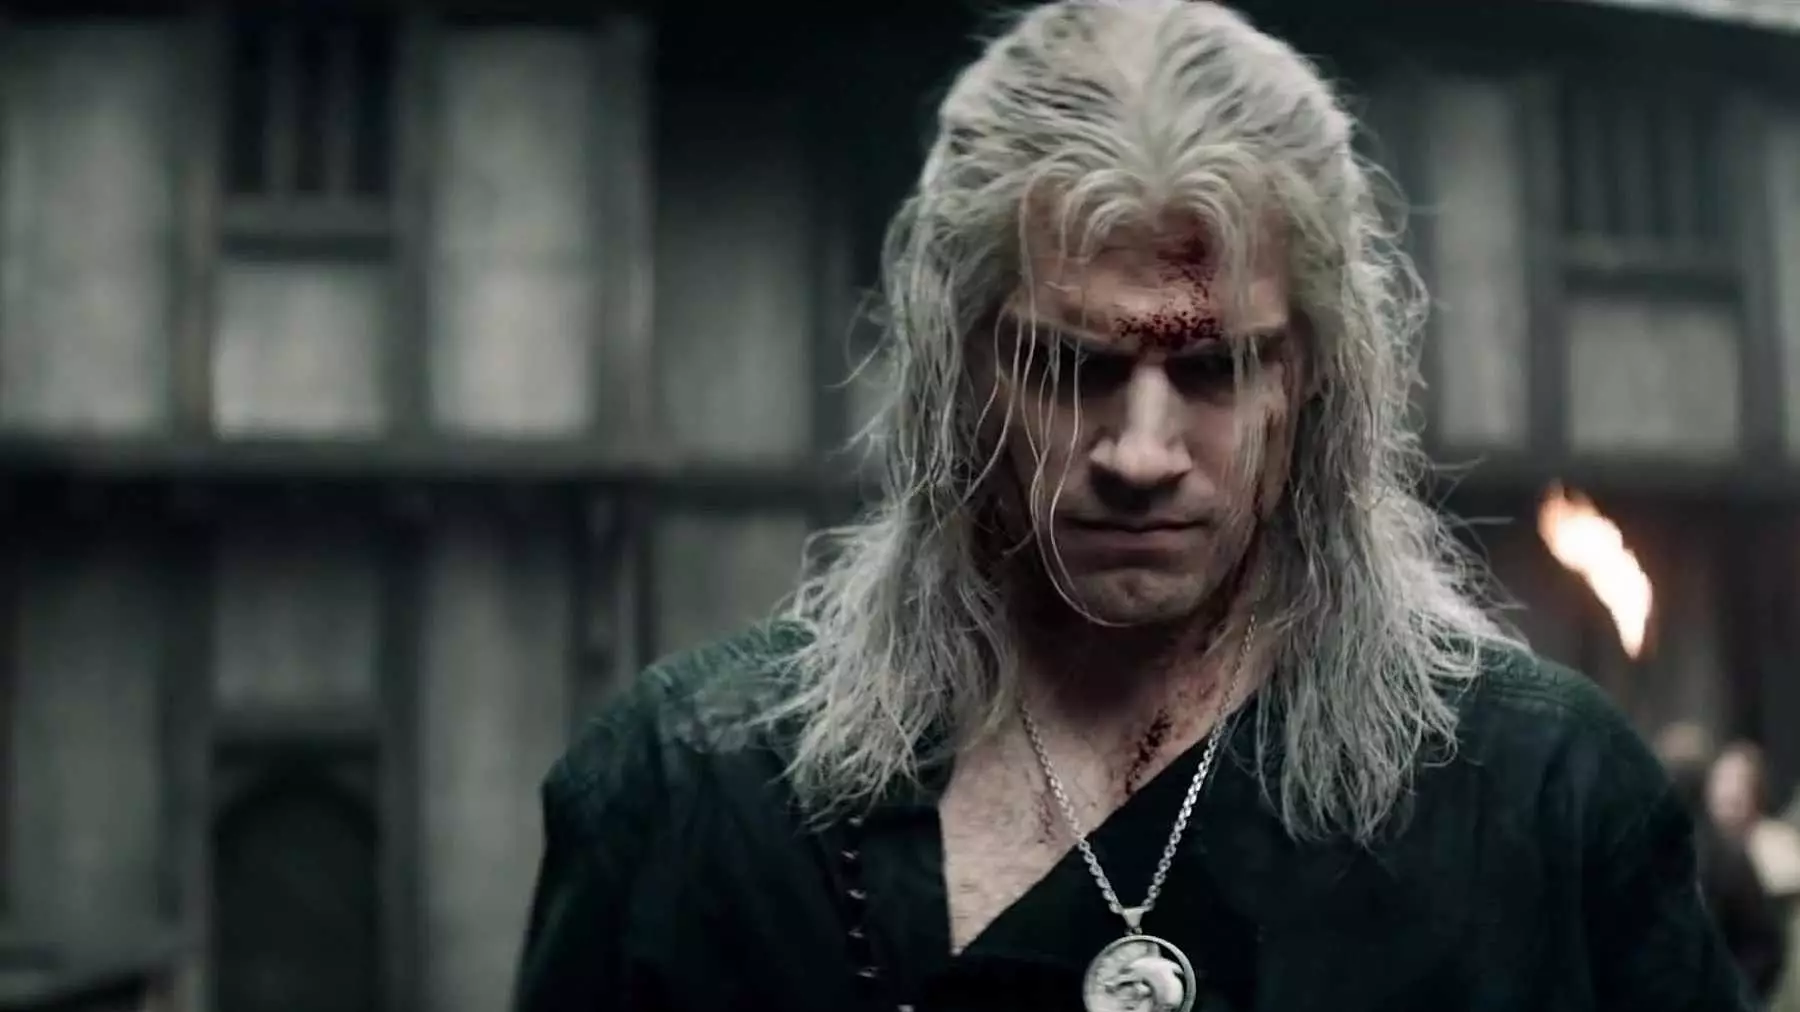 Henry Cavill says his role in The Witcher doesn't rule him out from playing Superman.